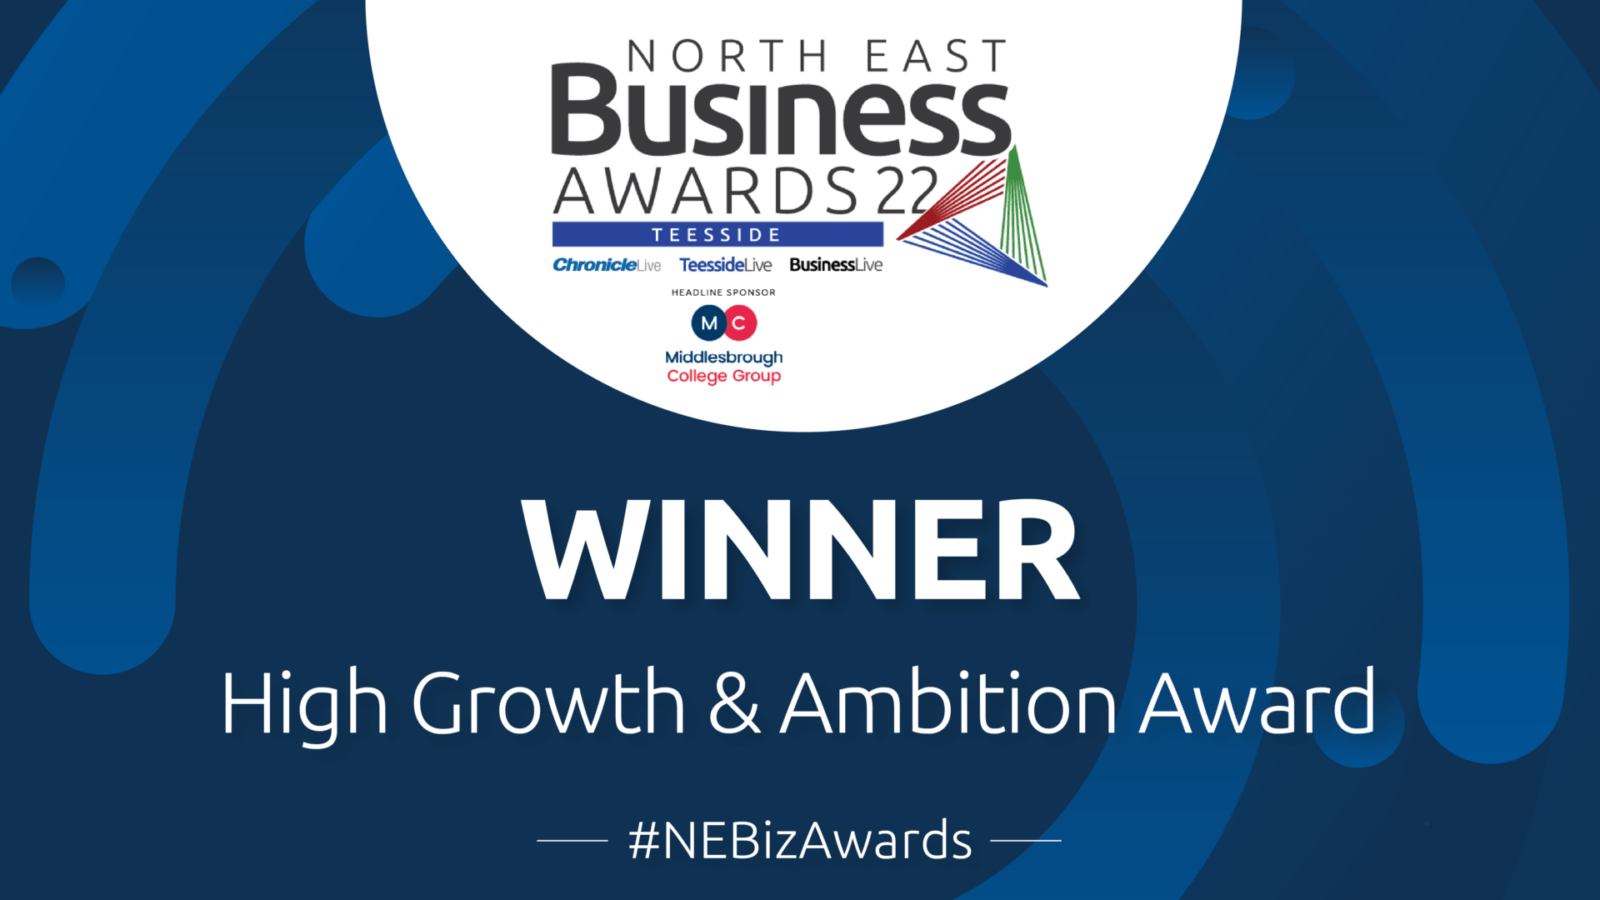 North East Business Awards 2022 Teesside | Winner of the High Growth & Ambition Award